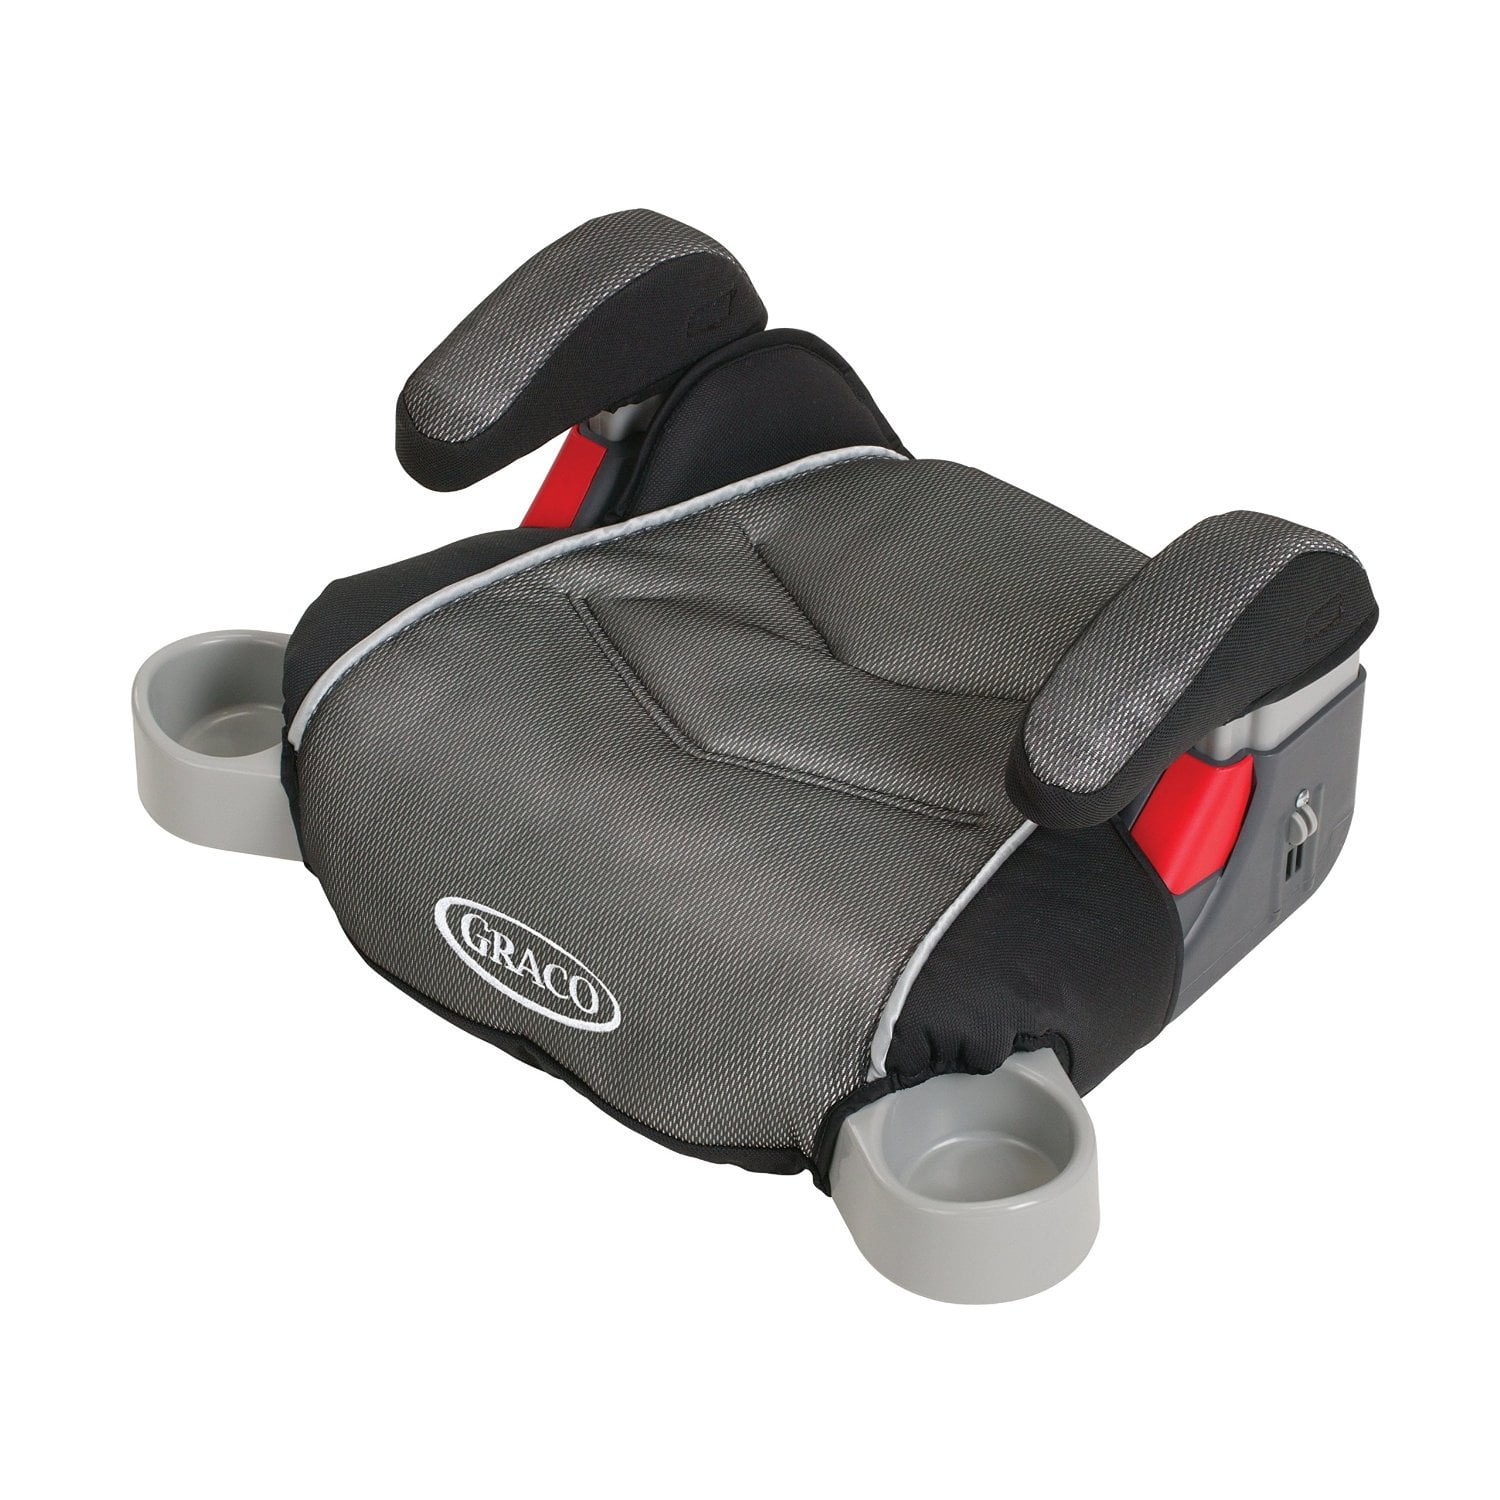 Photo 1 of Graco TurboBooster Backless Booster Car Seat, Galaxy Gray